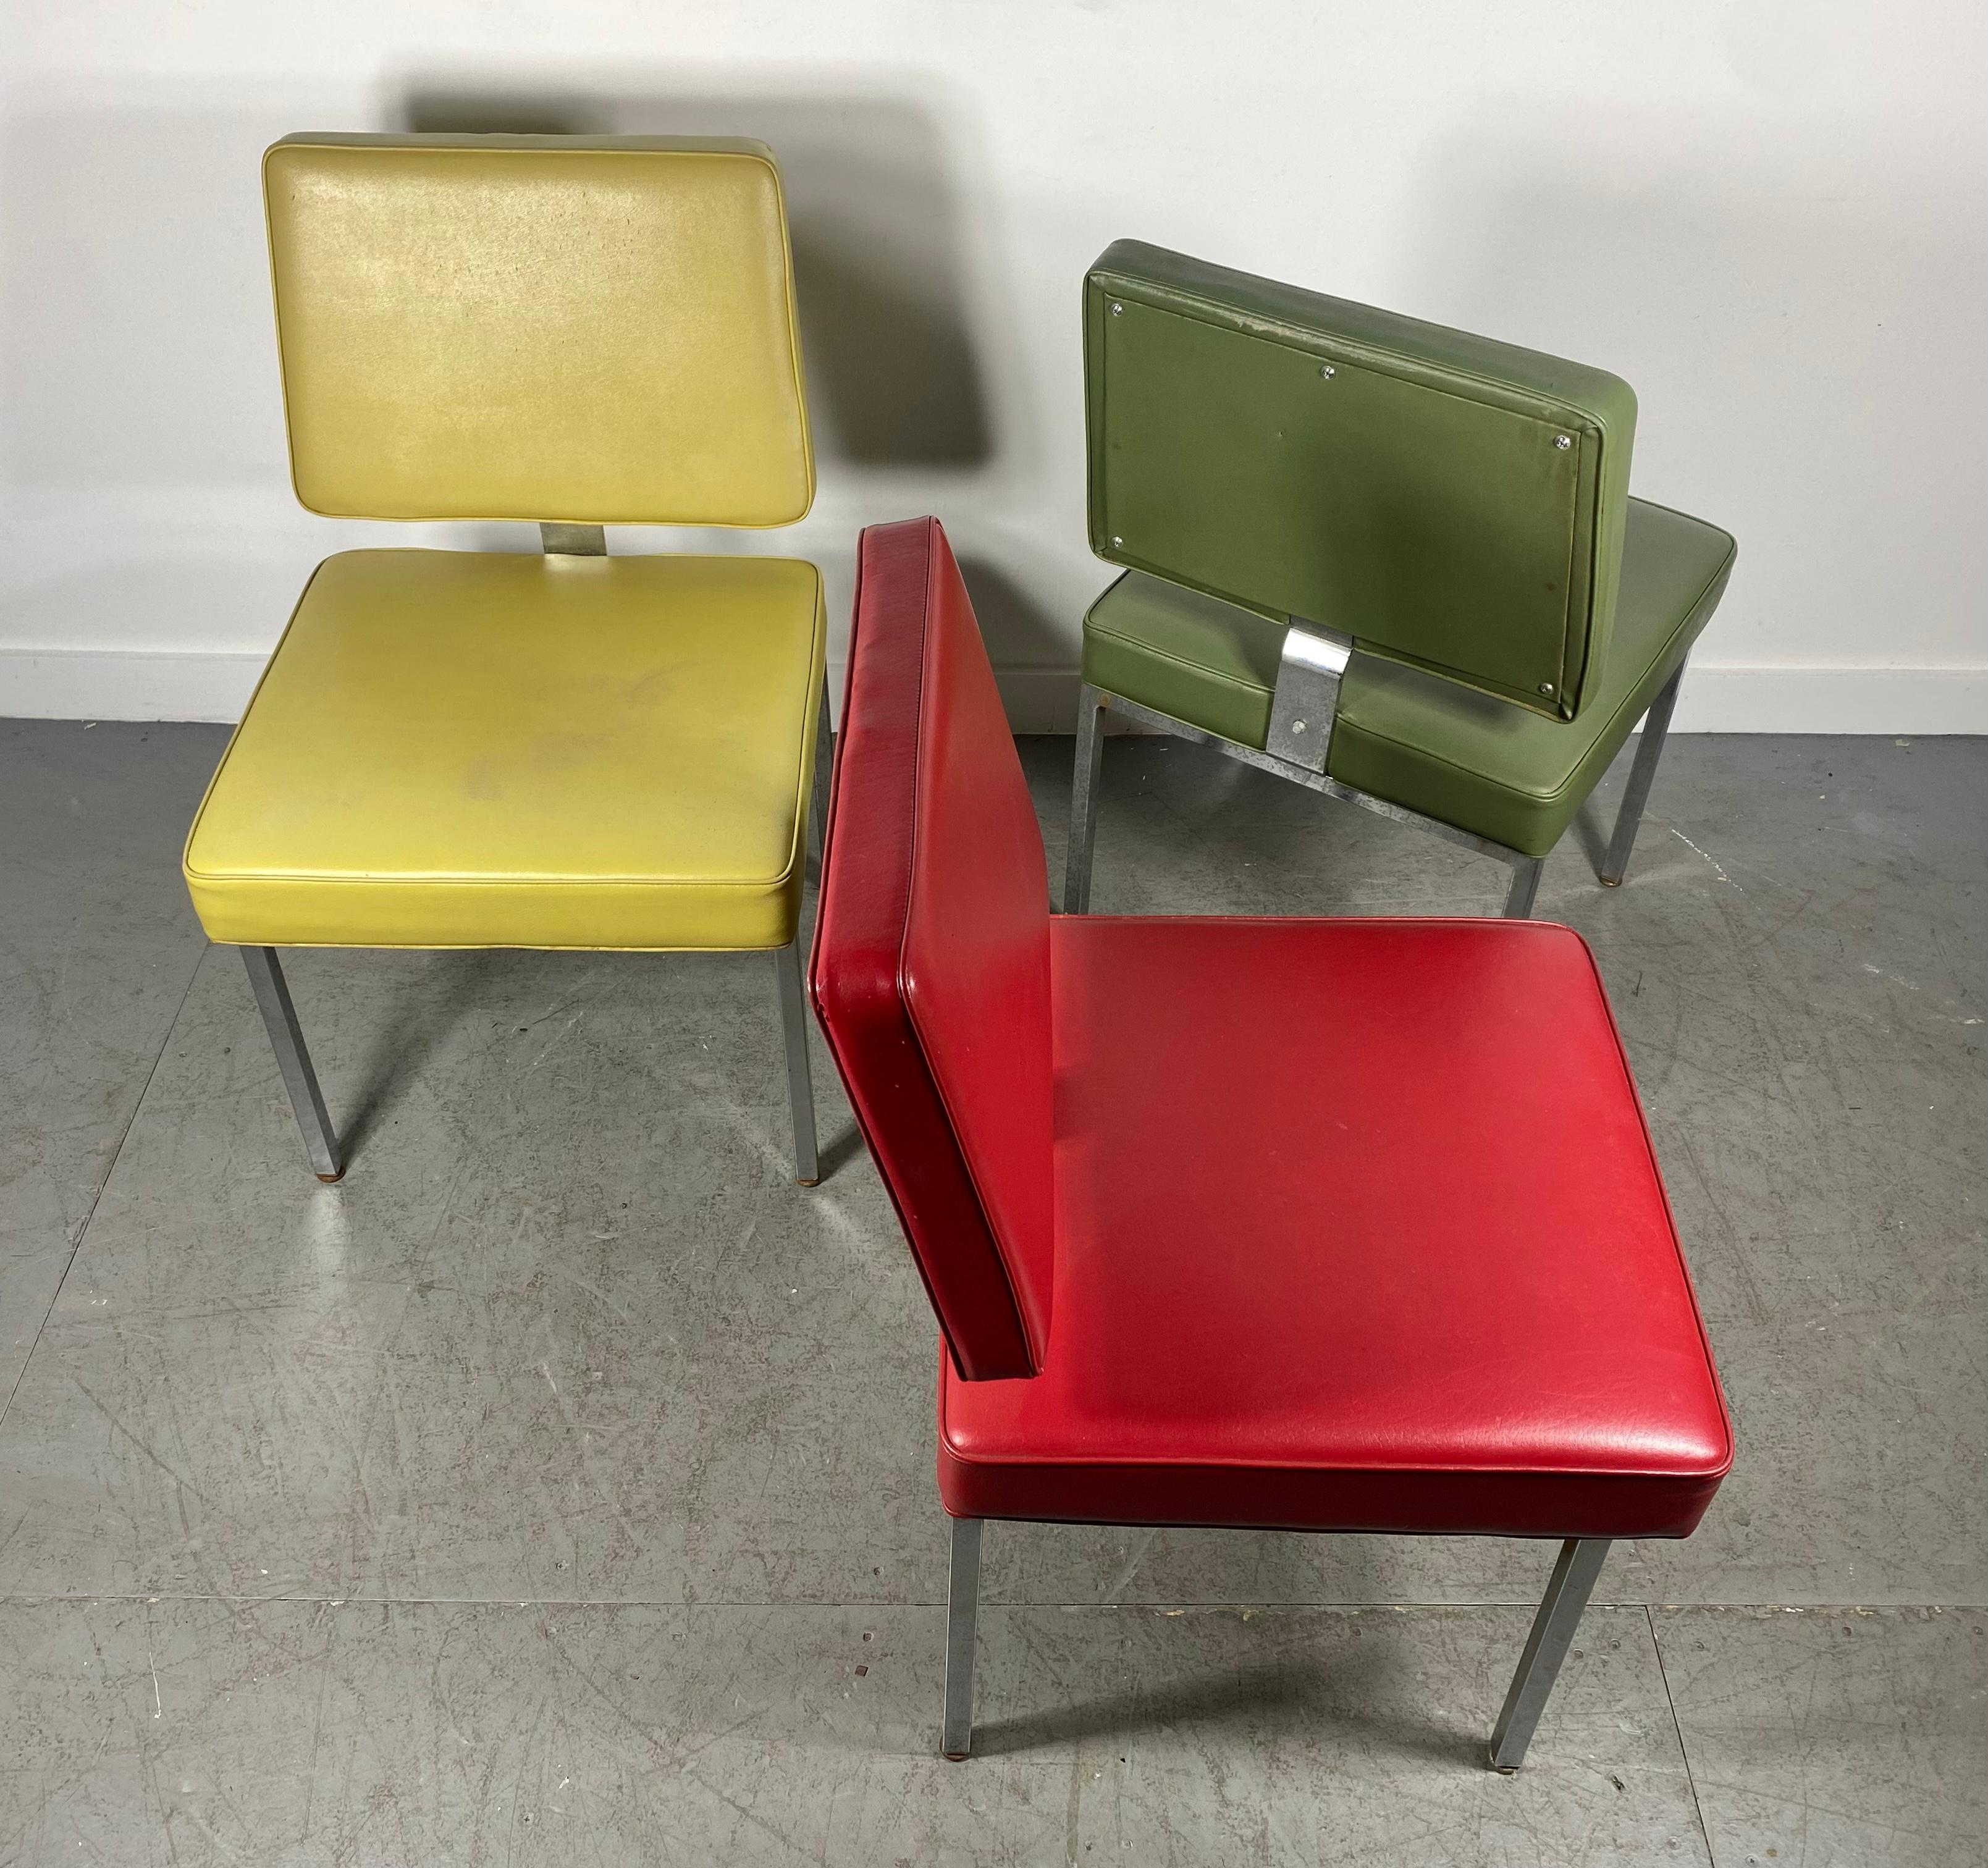 Classic Mid-Century Modern Knoll Style Chrome Side Chairs / Signore Inc In Good Condition For Sale In Buffalo, NY